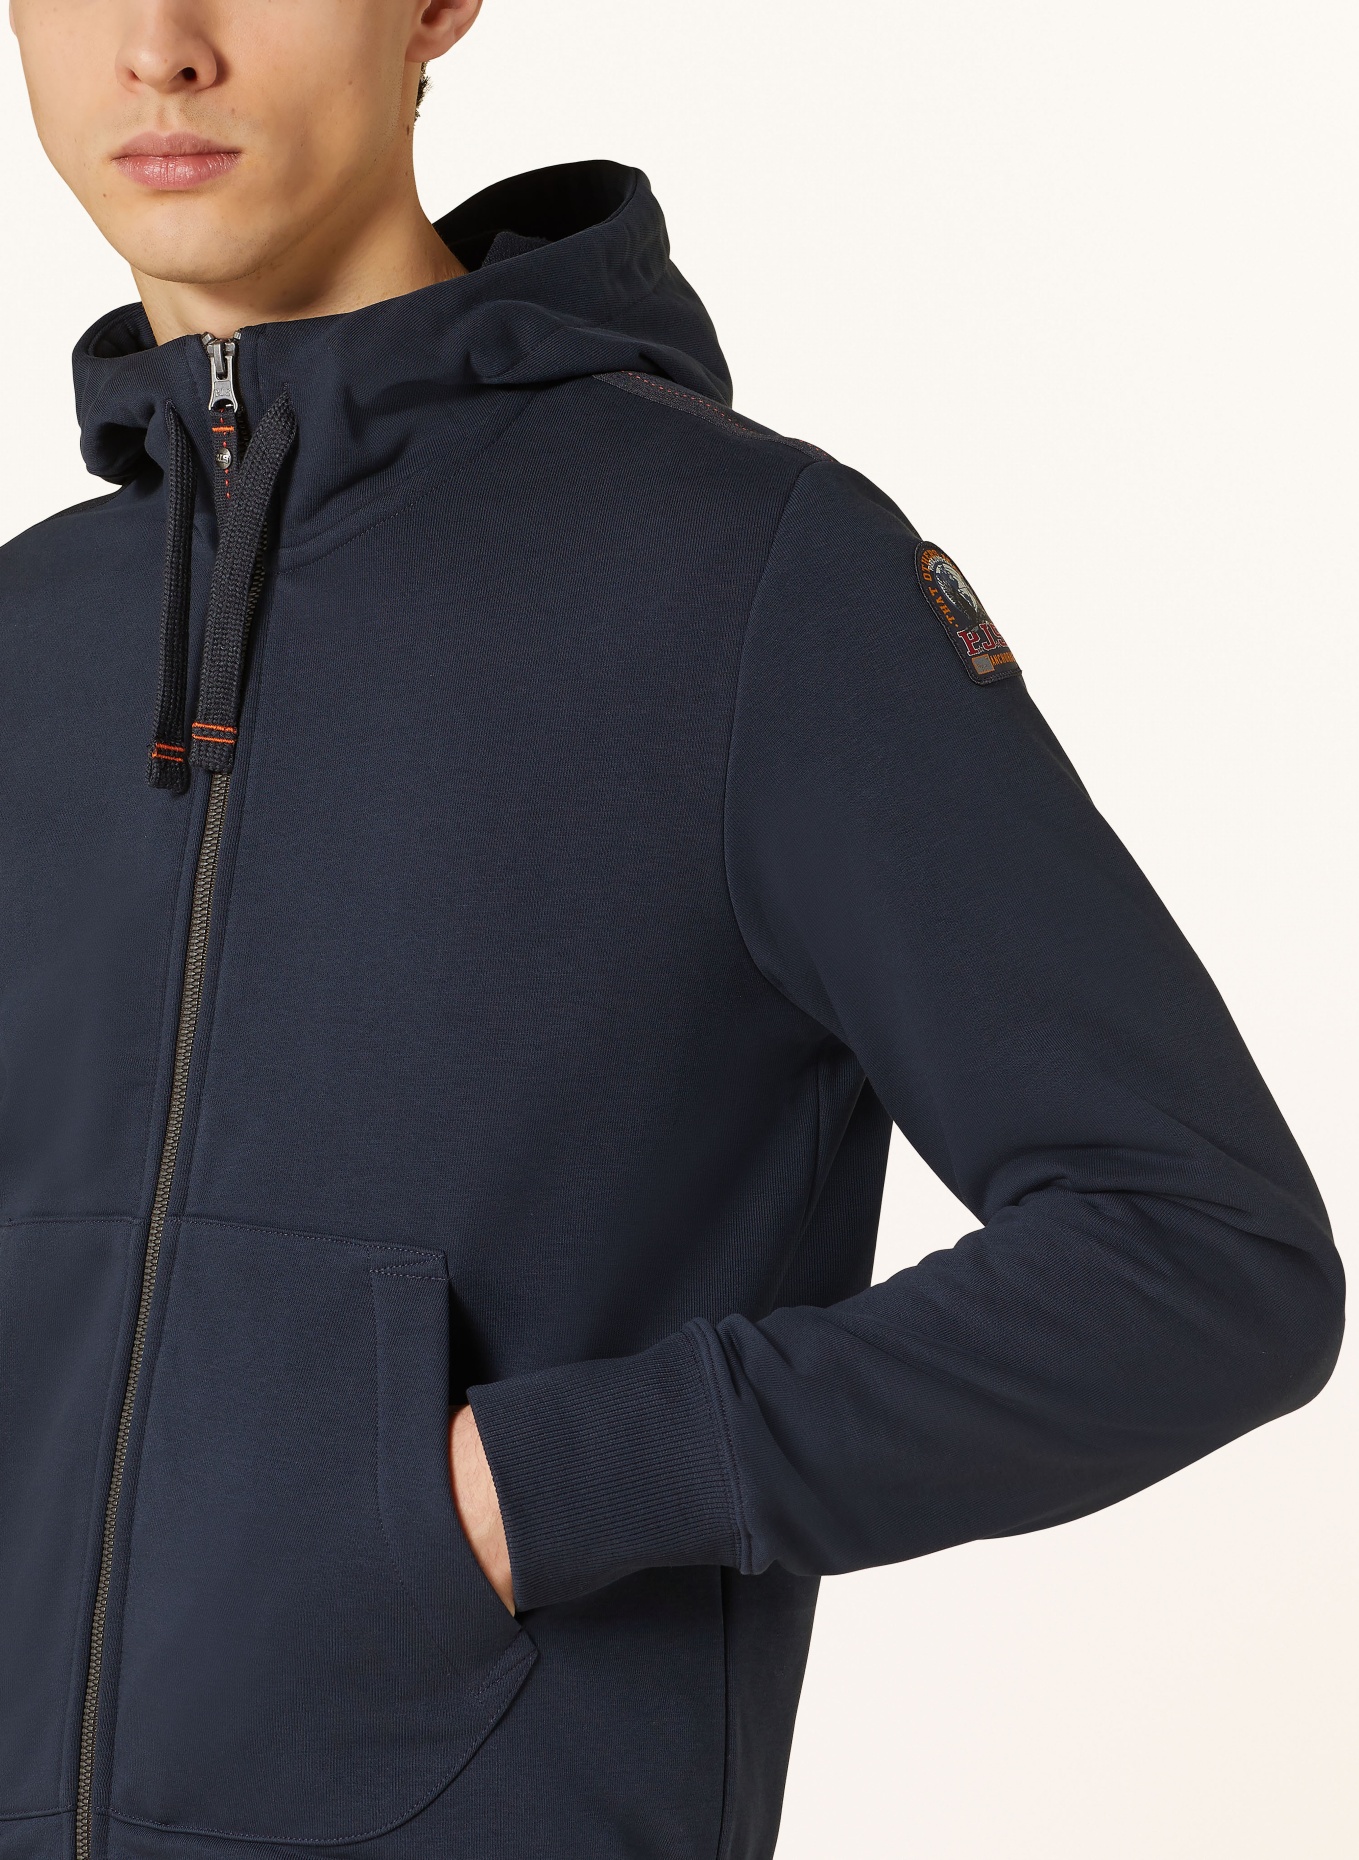 PARAJUMPERS Sweatjacke CHARLIE EASY, Farbe: 0316 blue navy (Bild 5)